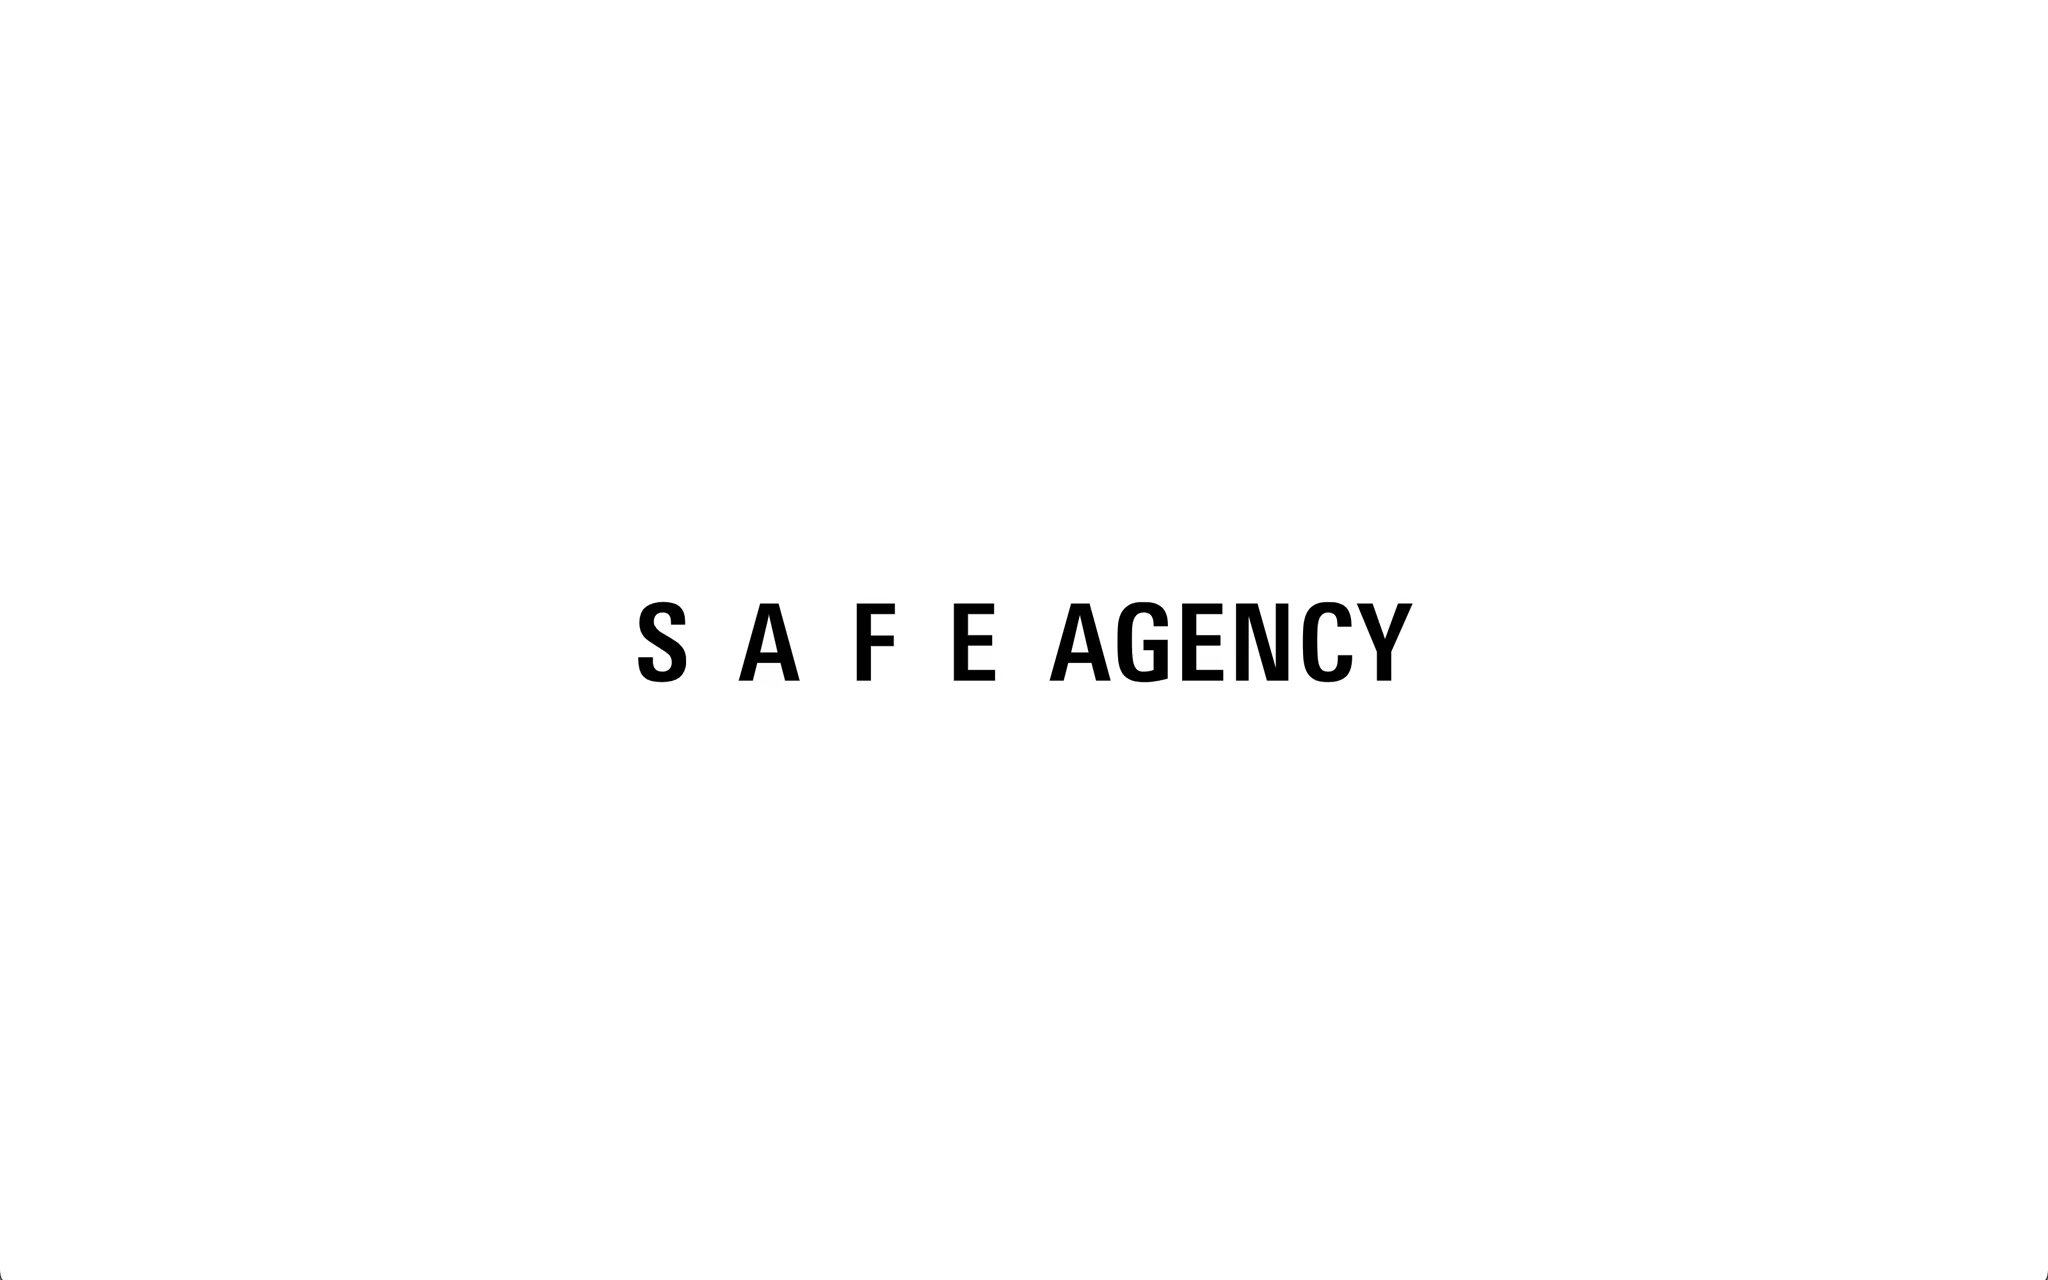 Screenshot of the Safe Agency website showing the logo on a white background